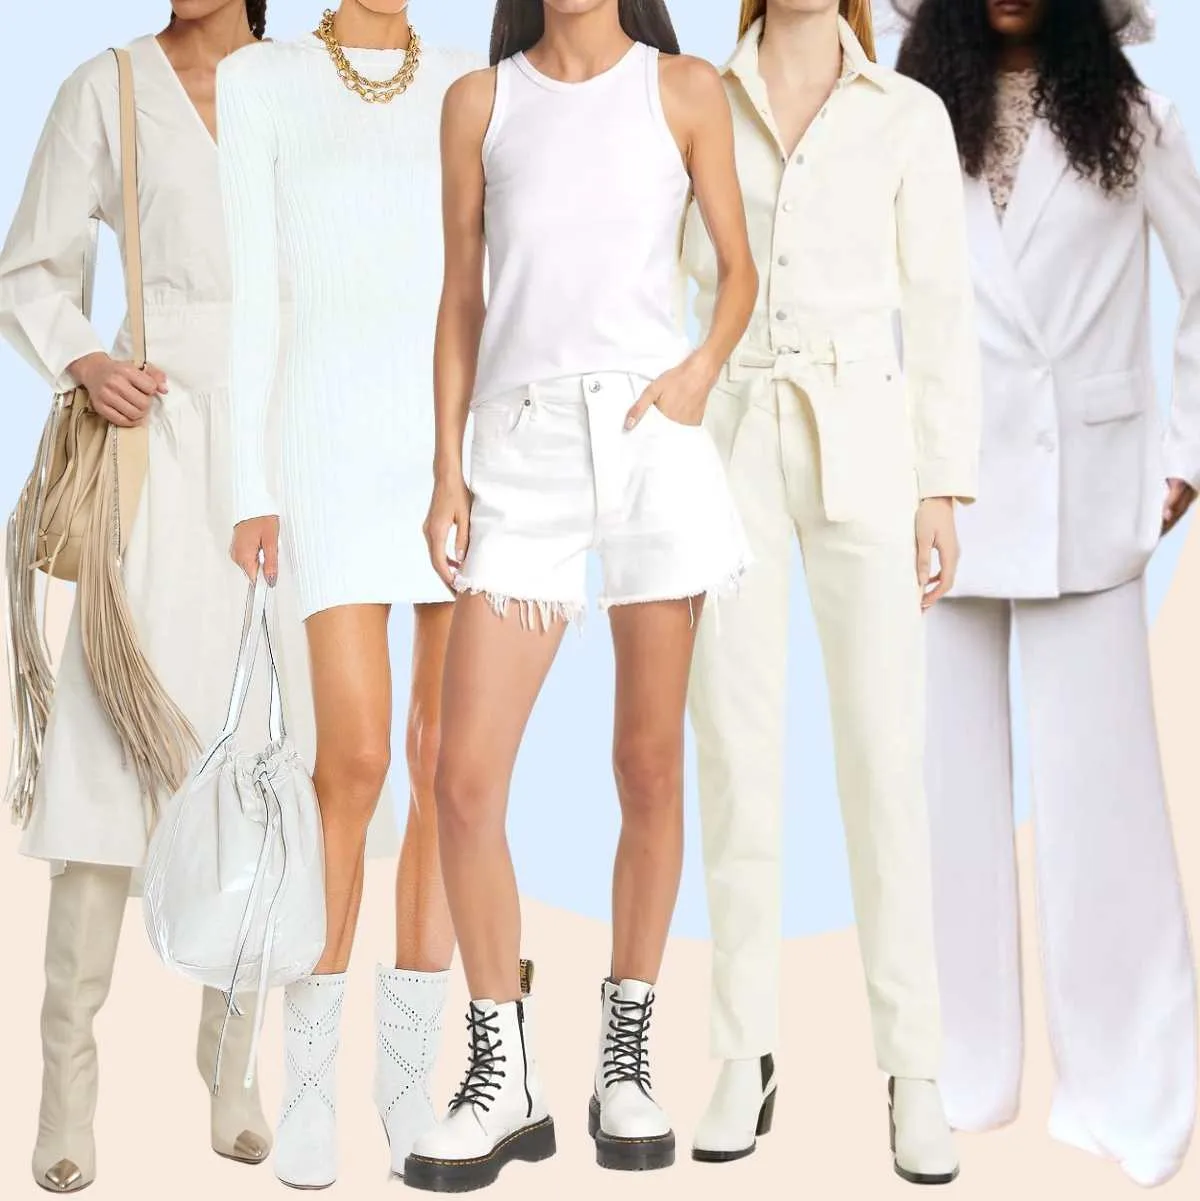 Collage of 5 women wearing different all white white boots outfits.